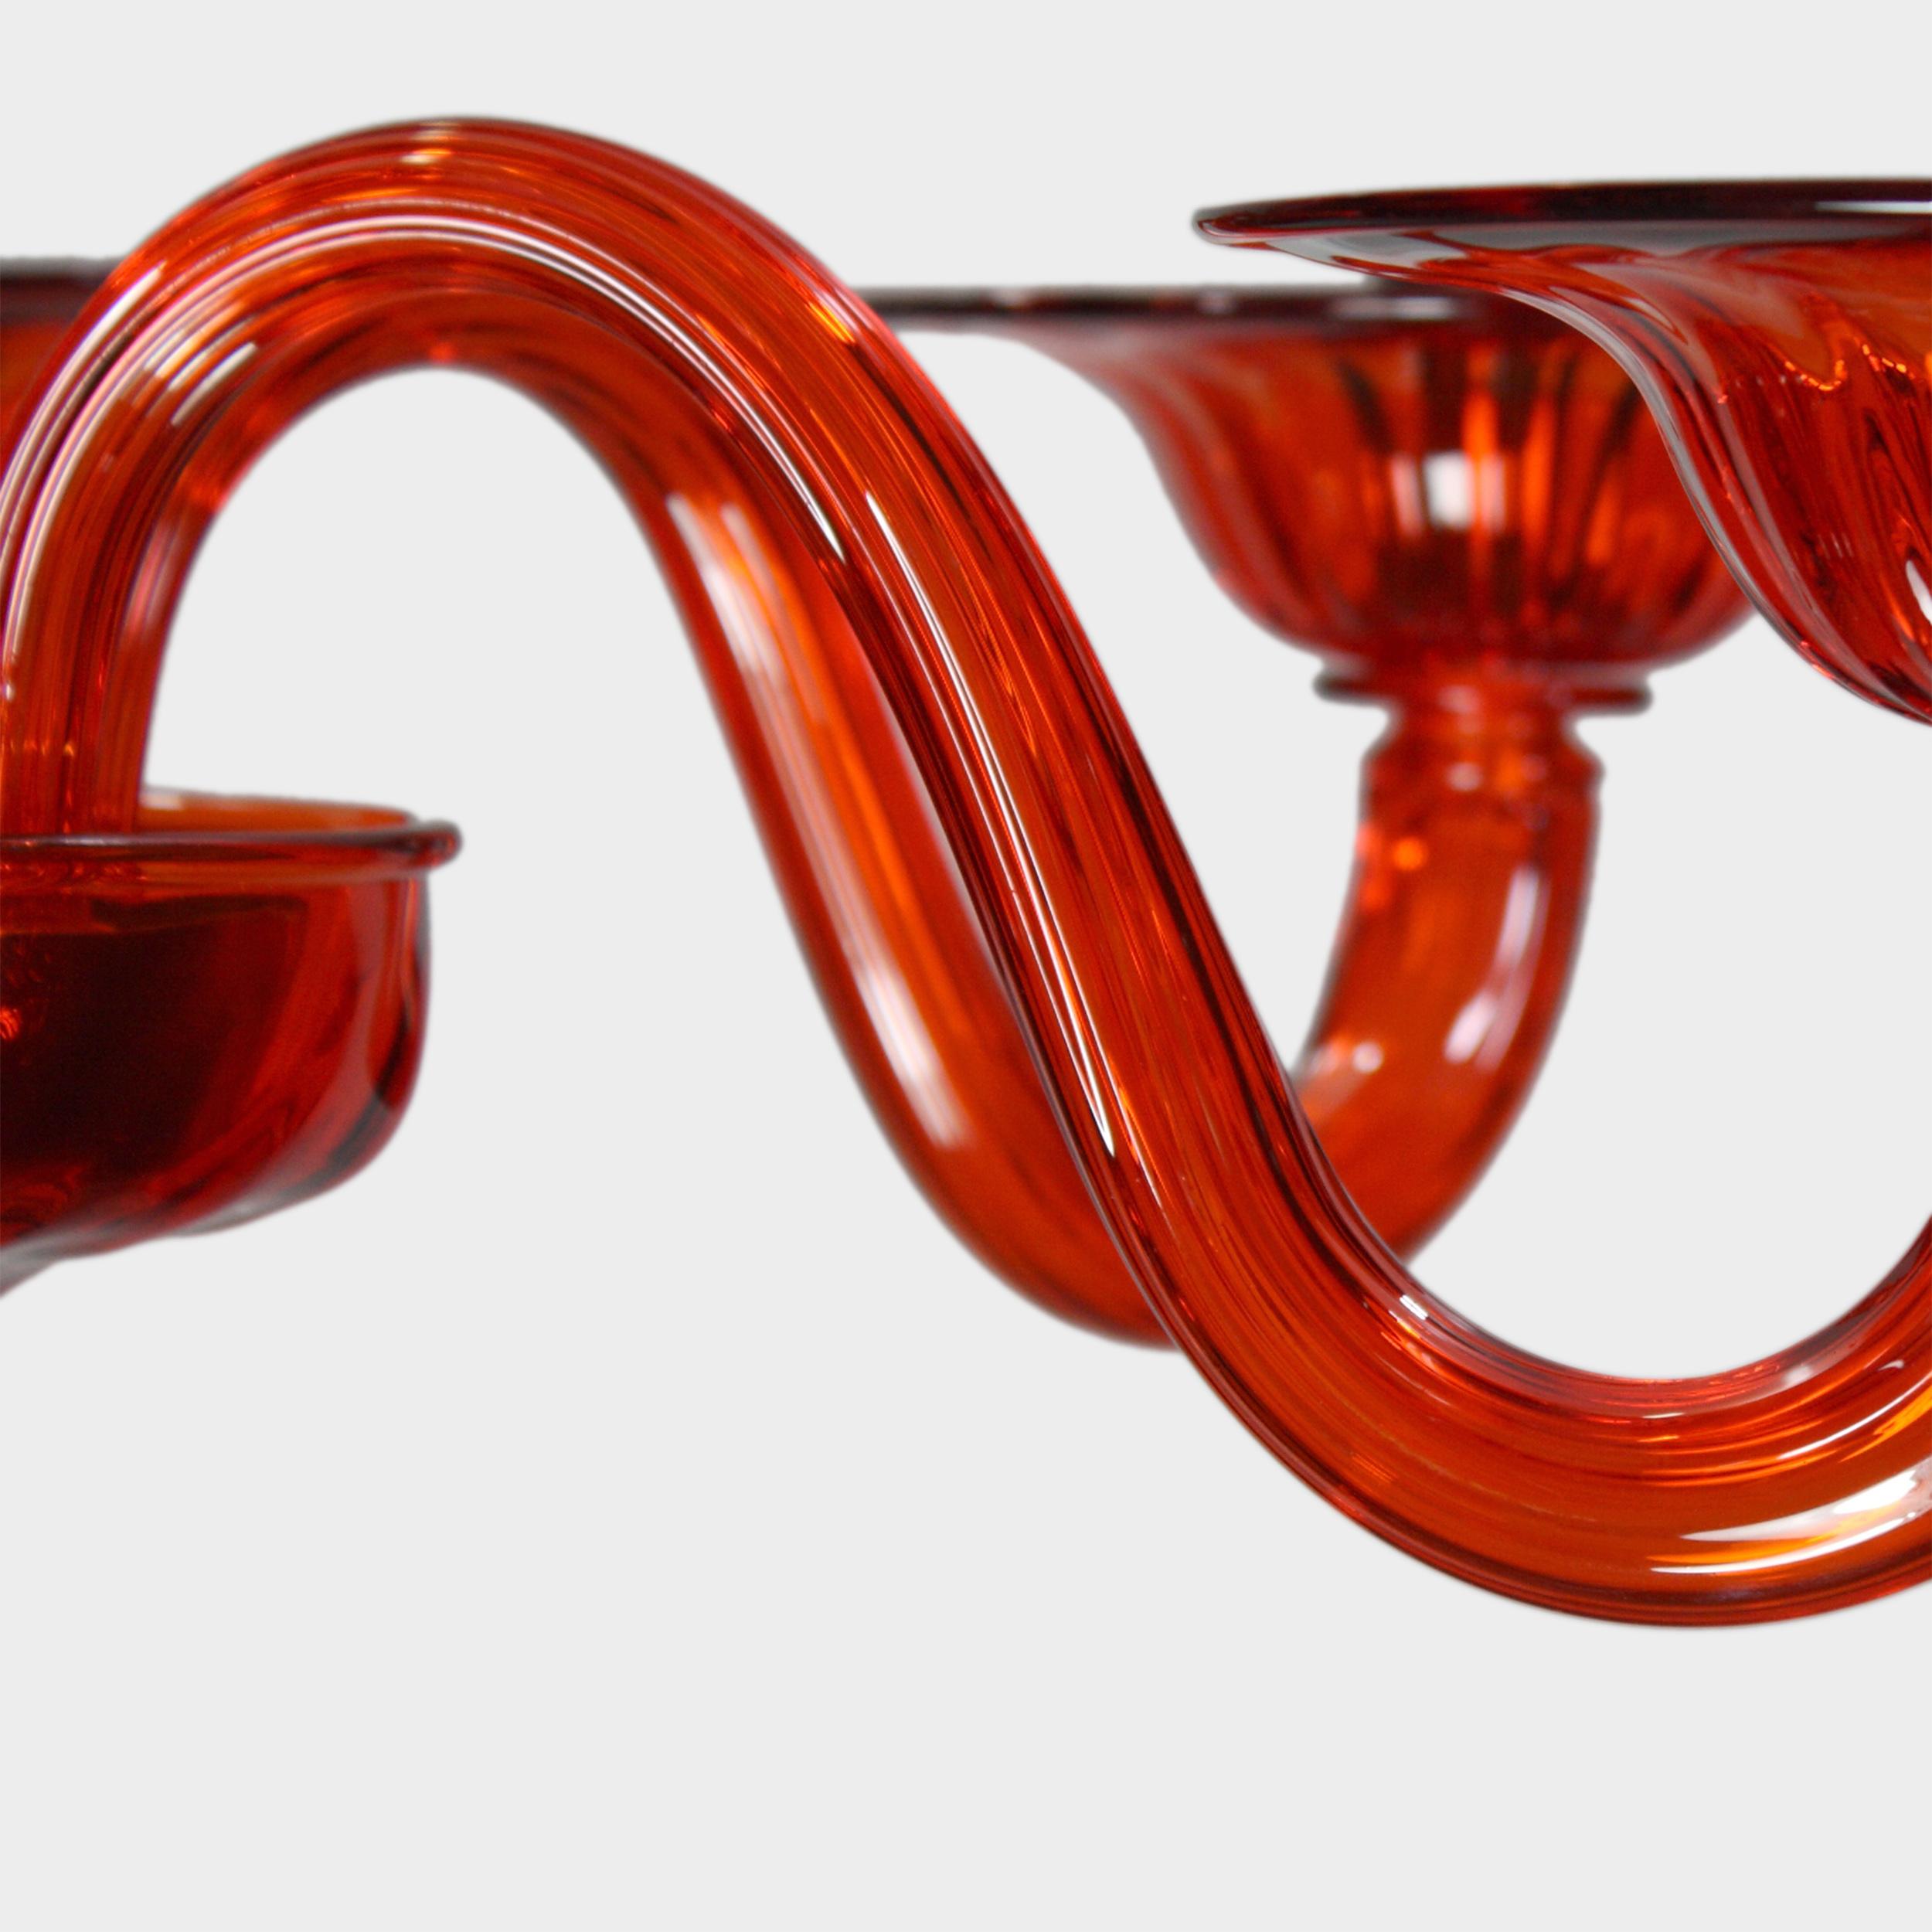 Italian 21st Century Chandelier, 6 Arms Orange Murano Glass by Multiforme For Sale